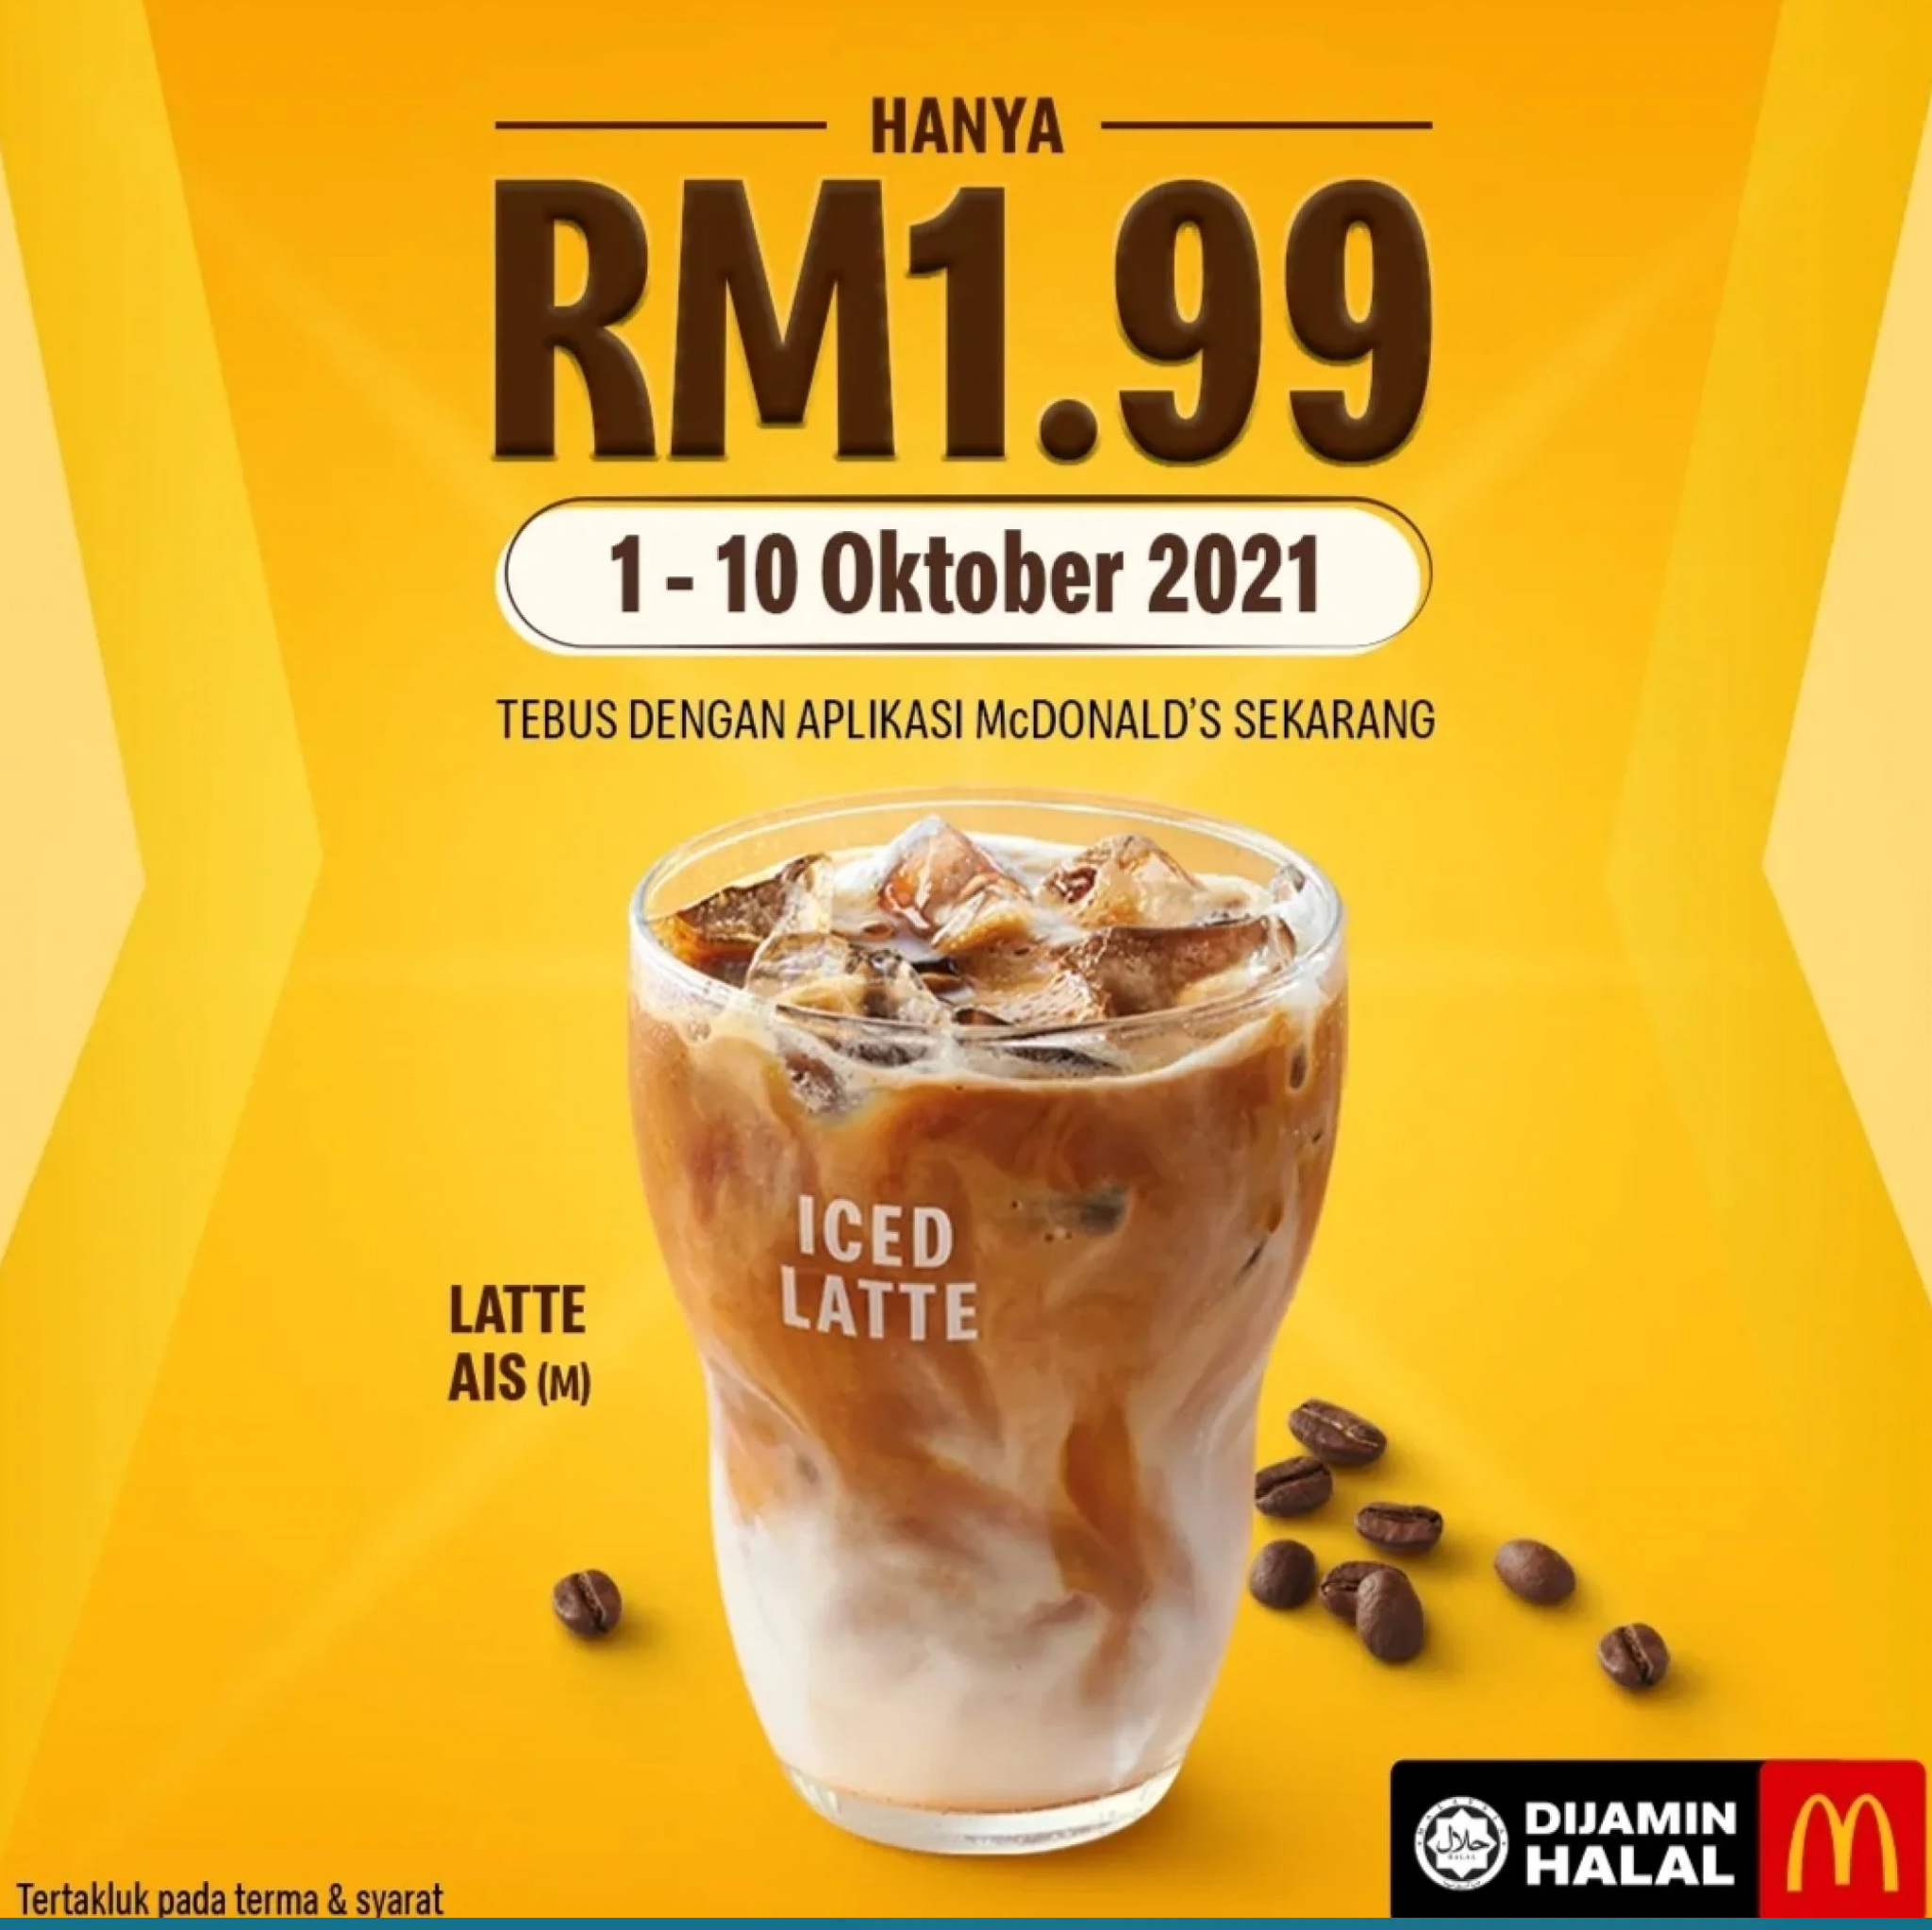 McDonald’s Iced Latte For Only RM1.99